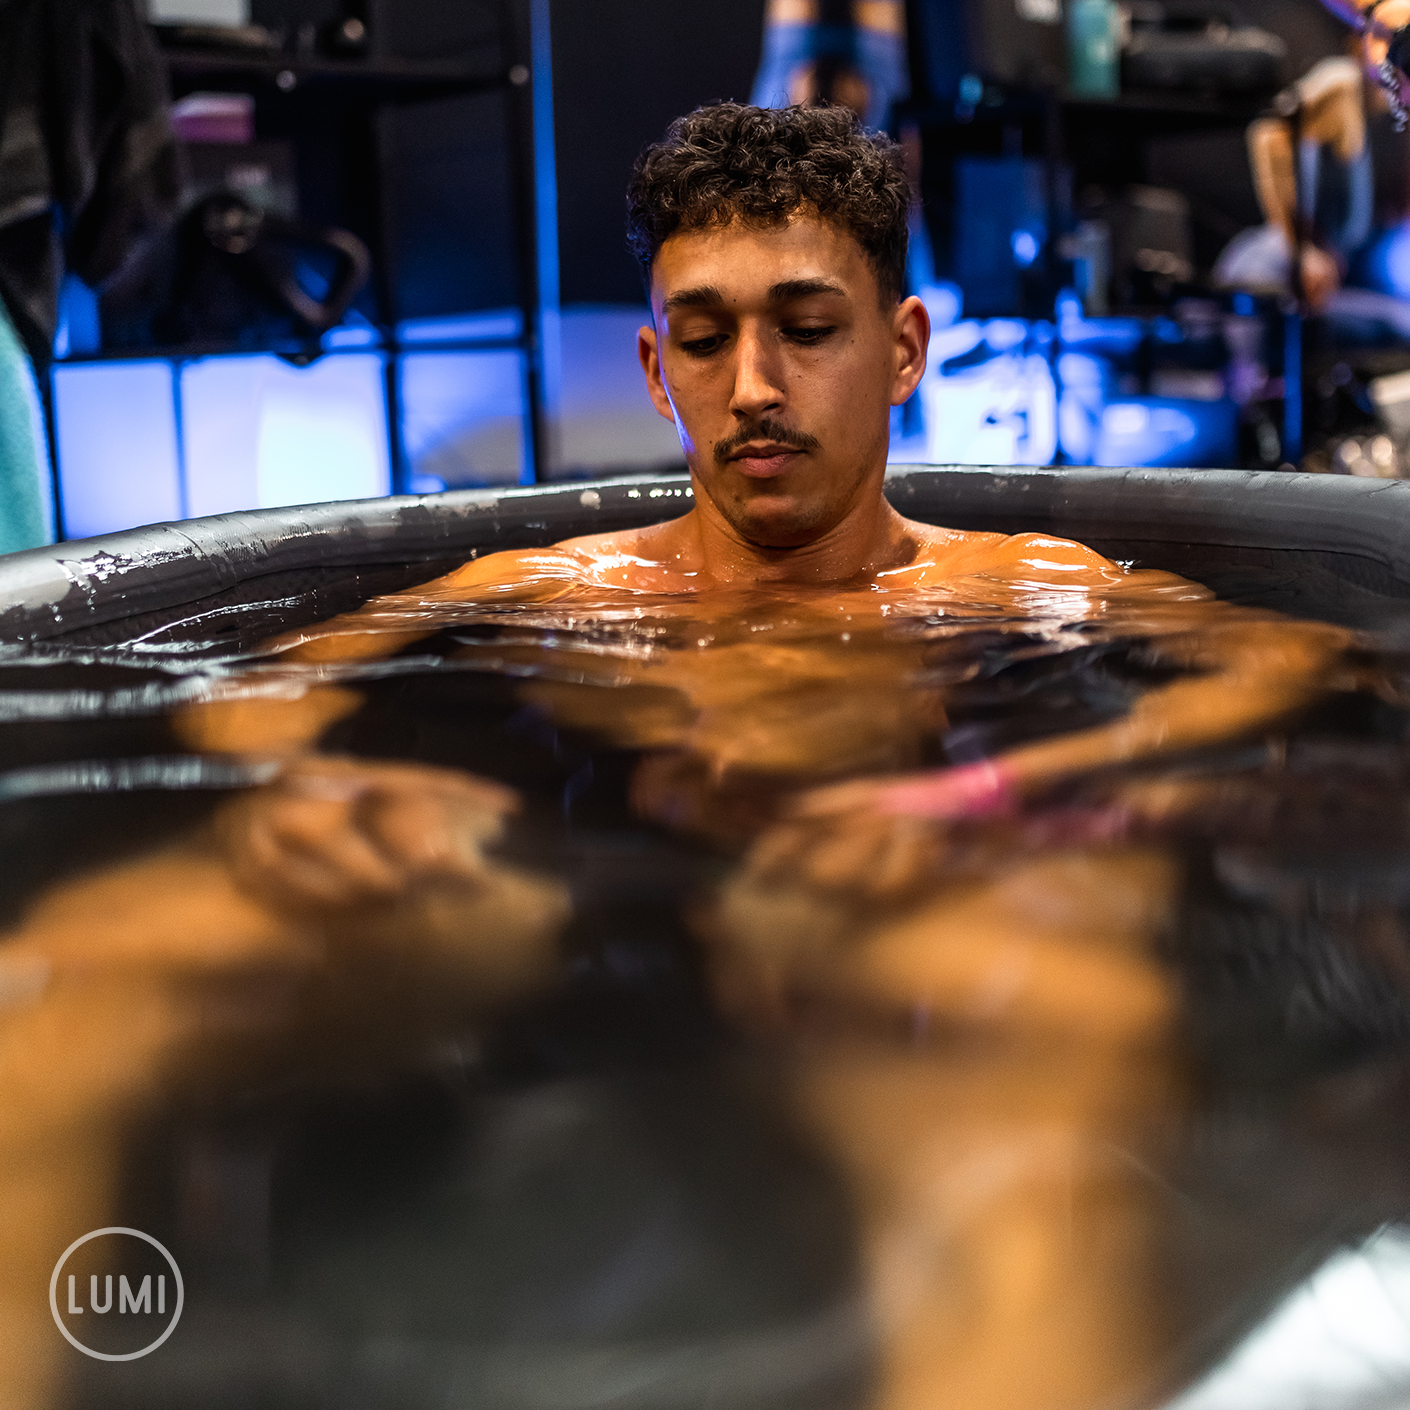 Does cold water help muscle recovery?